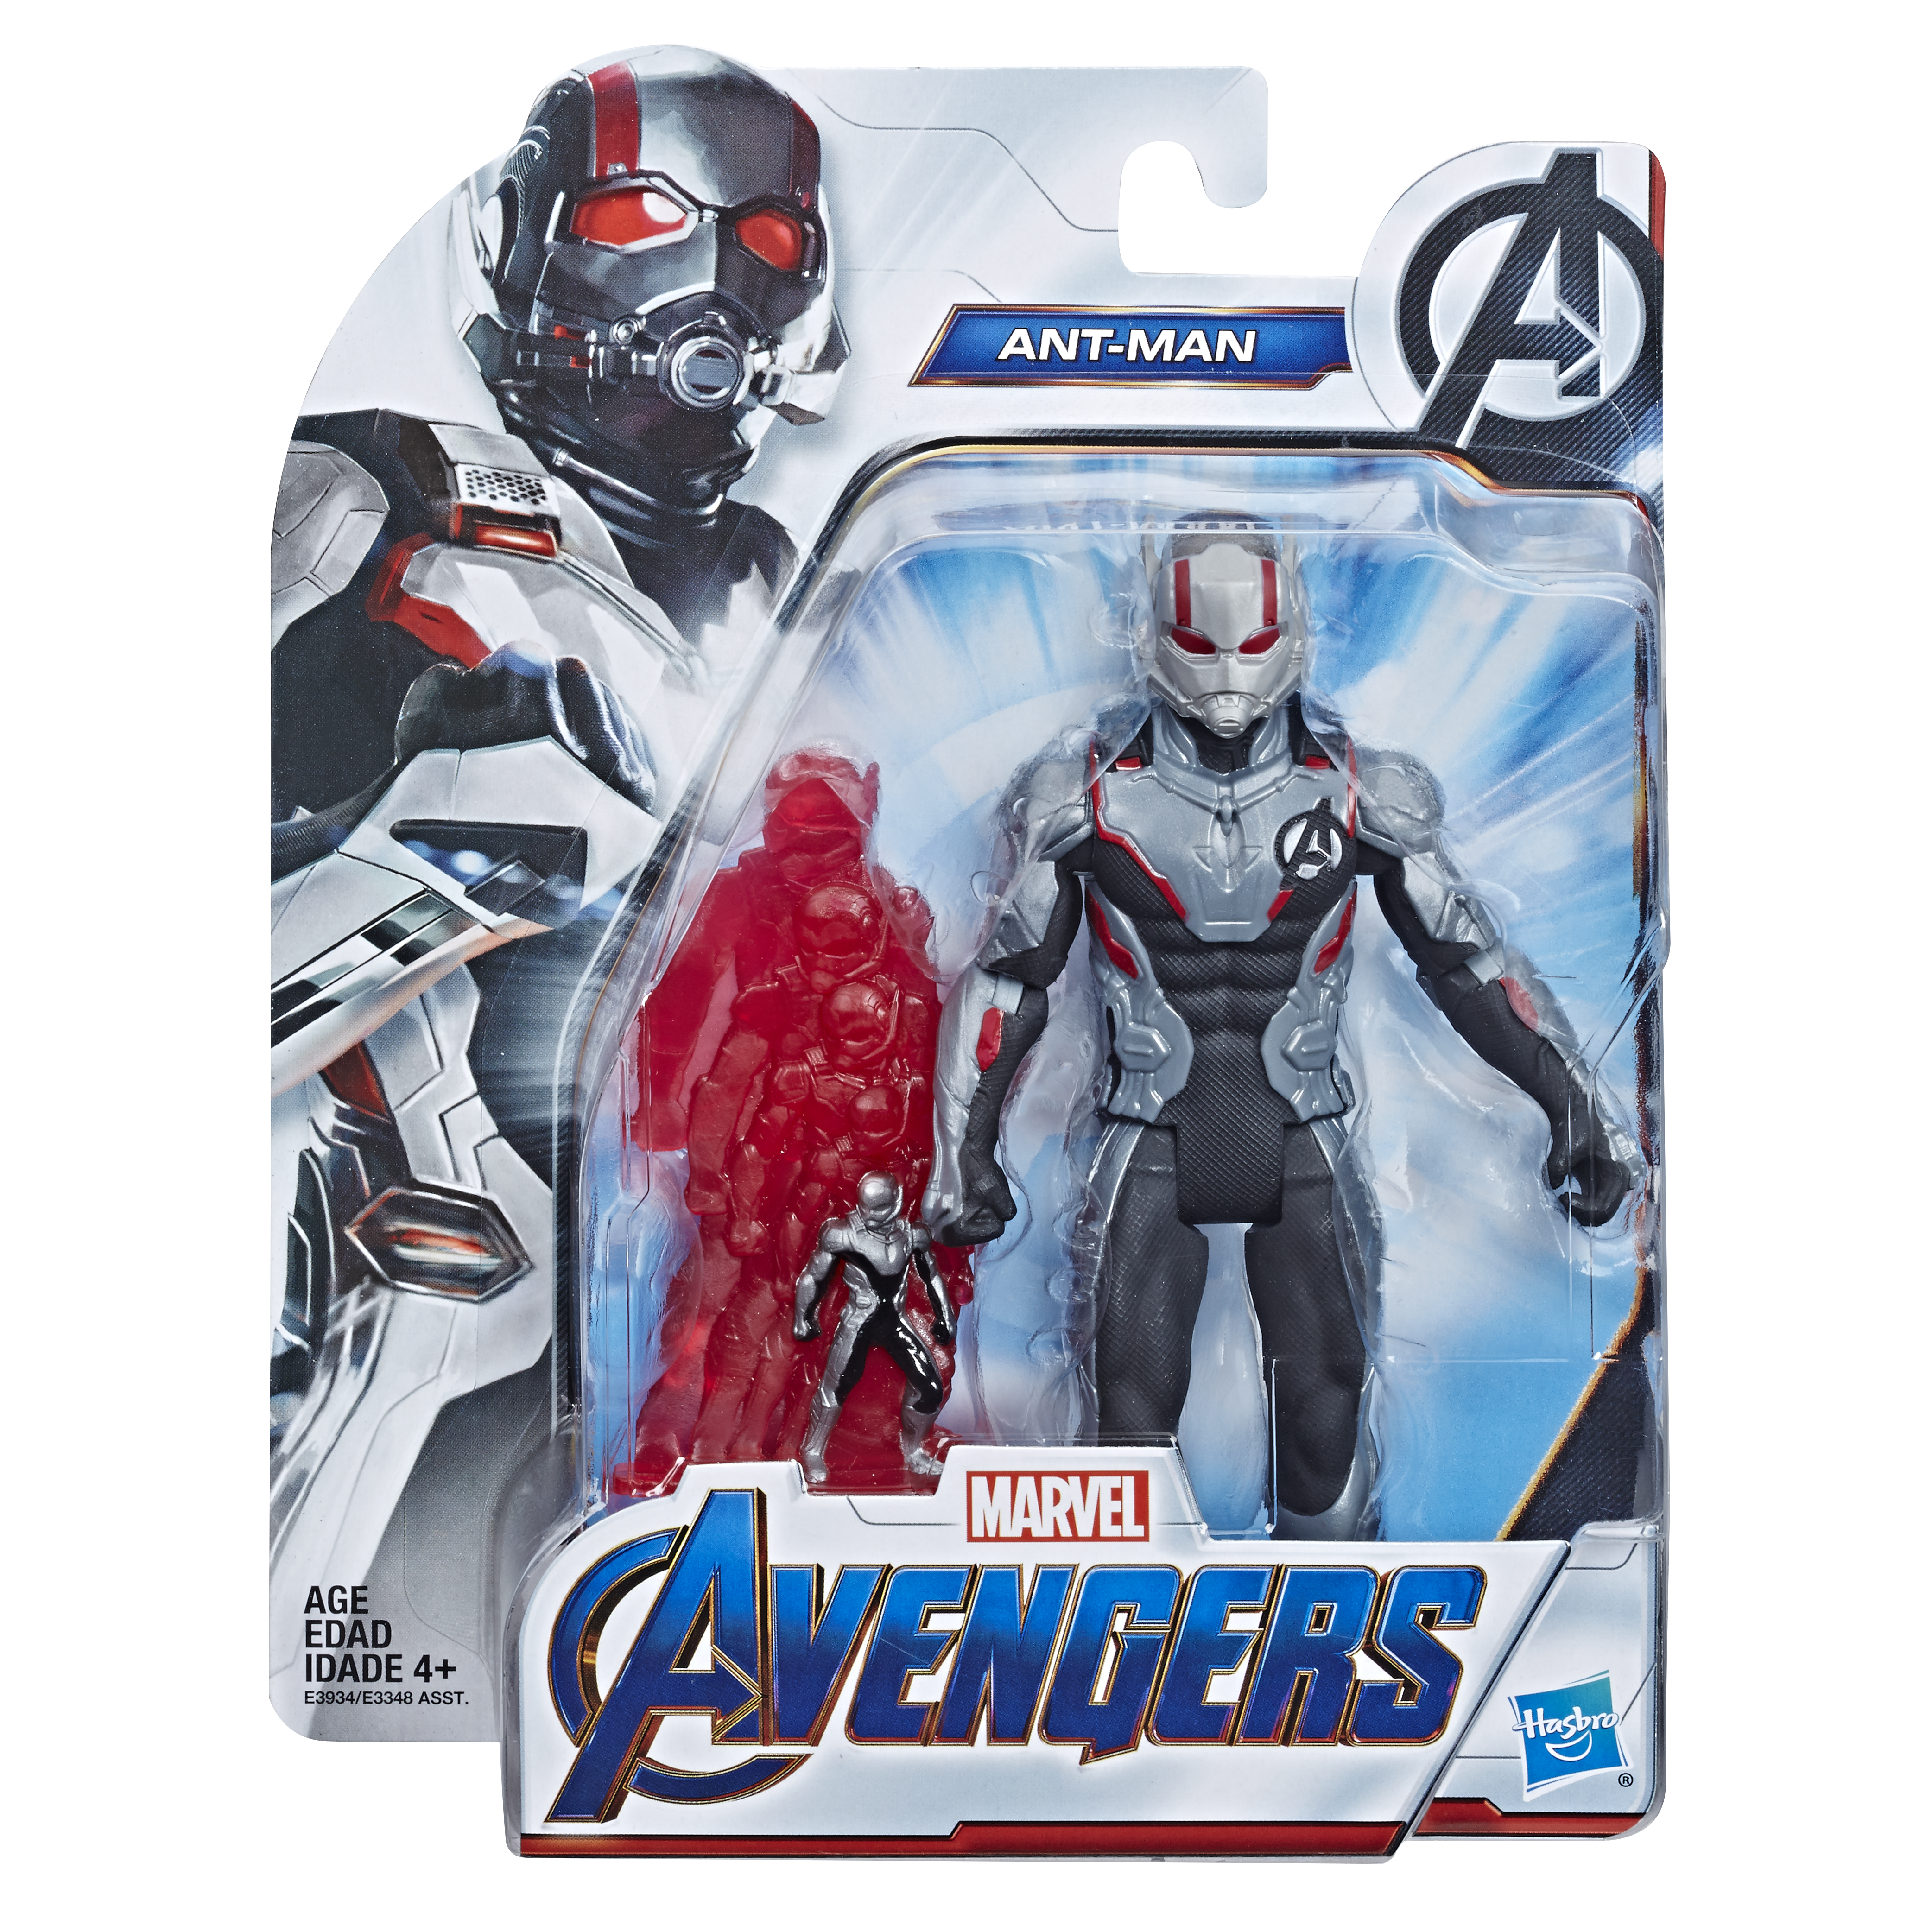 6-inch Ant-Man carded